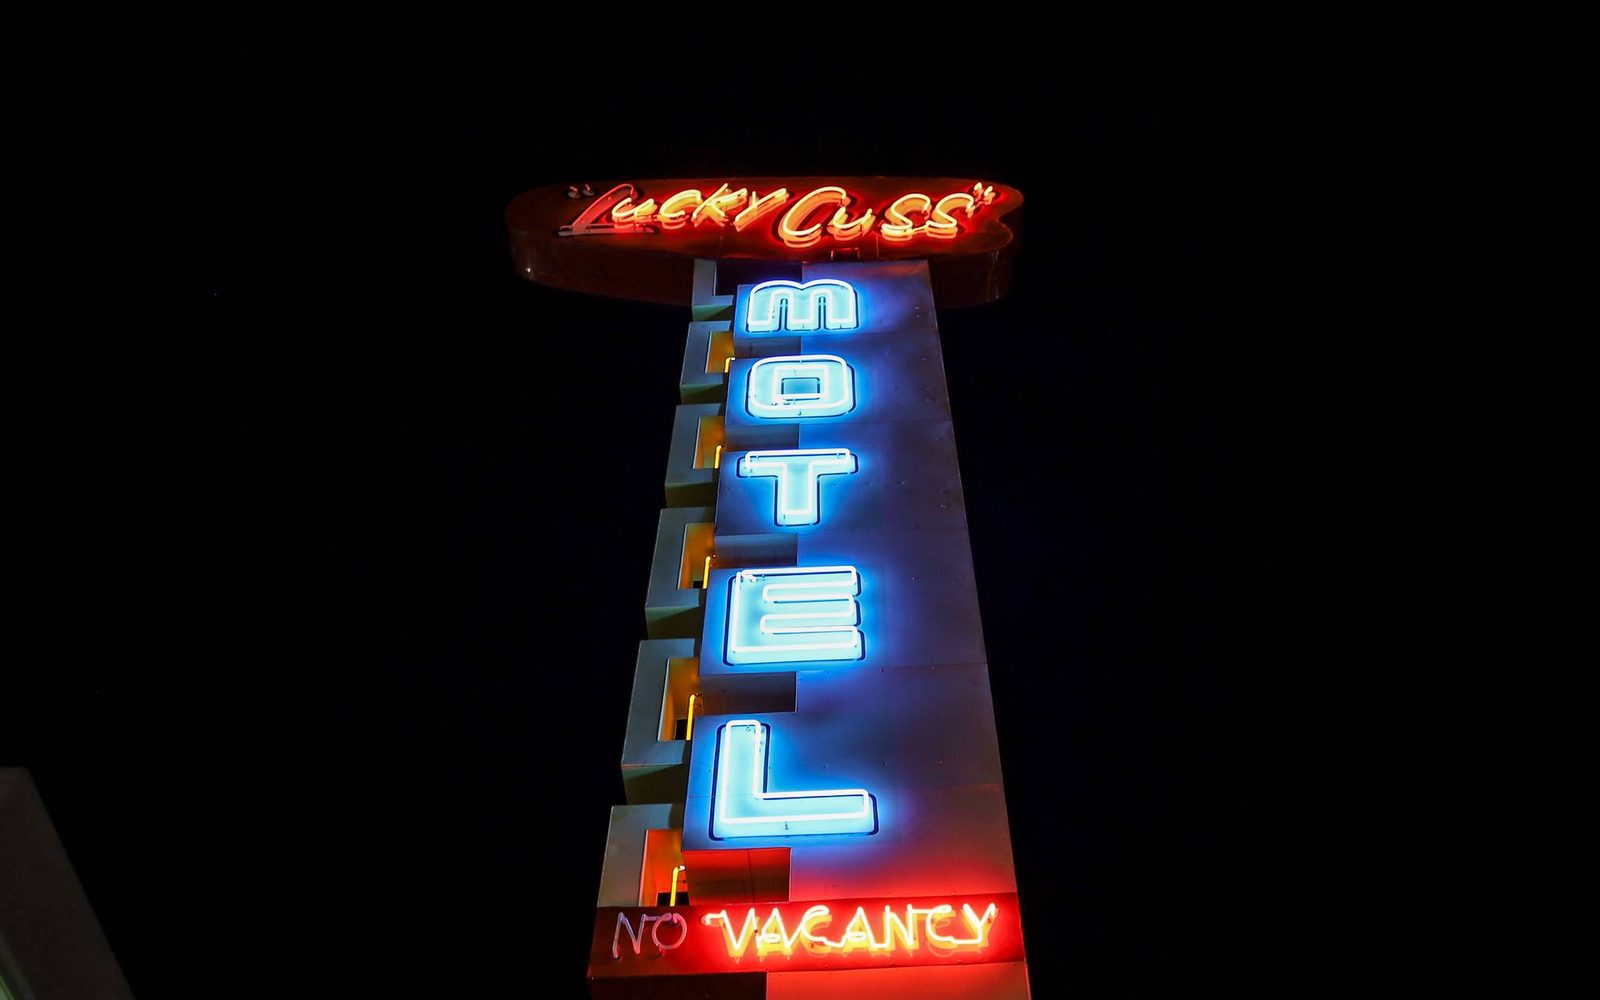 Lucky Cuss Motel - part of the Las Vegas Scenic Byway project